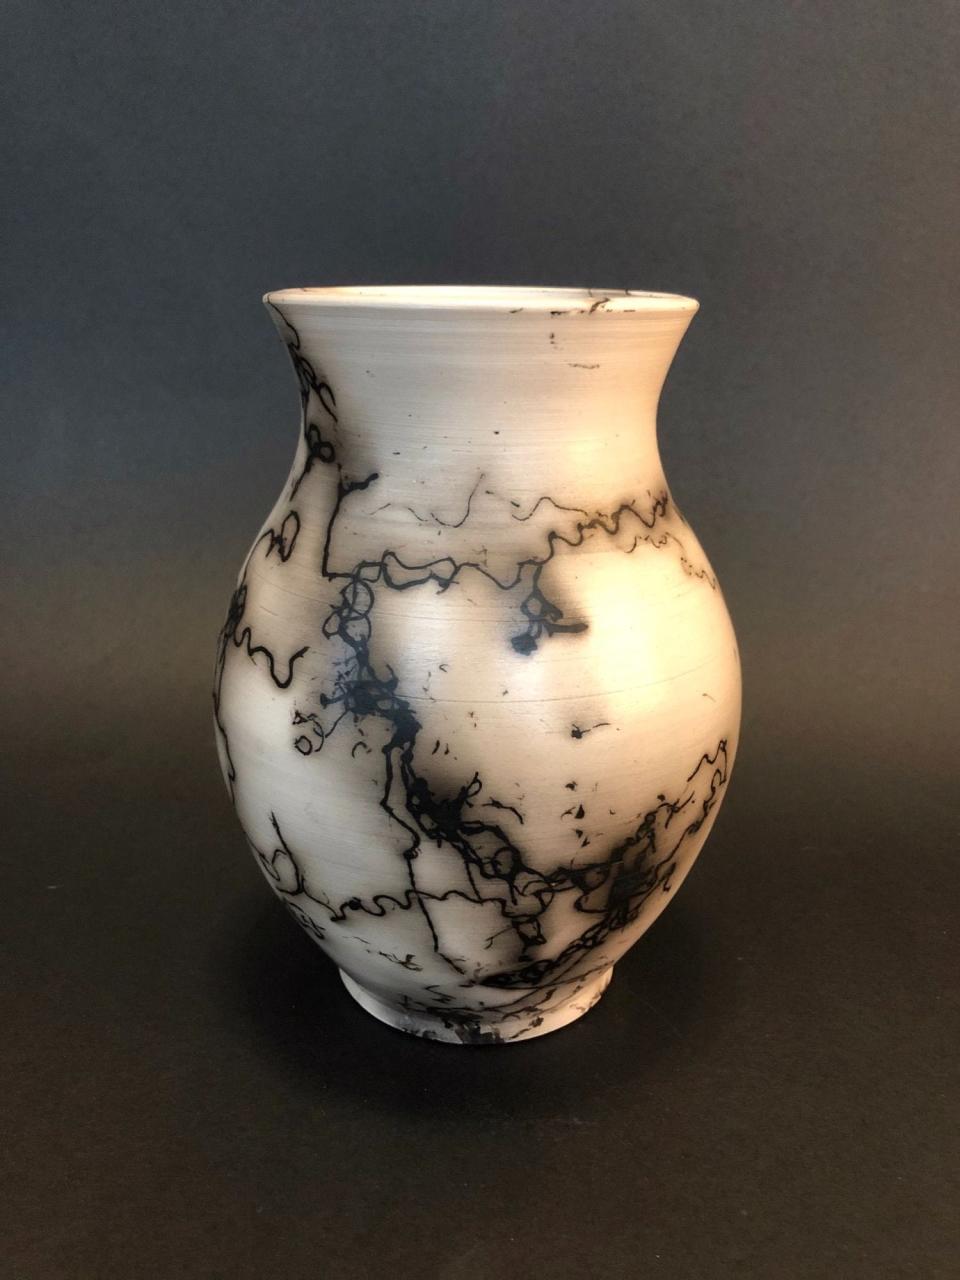 The Canton Ceramic Artists Guild will host their annual Spring Sale from 10 a.m. to 8 p.m. on Friday and from 10 a.m. to 2 p.m. Saturday at the Canton Museum of Art.